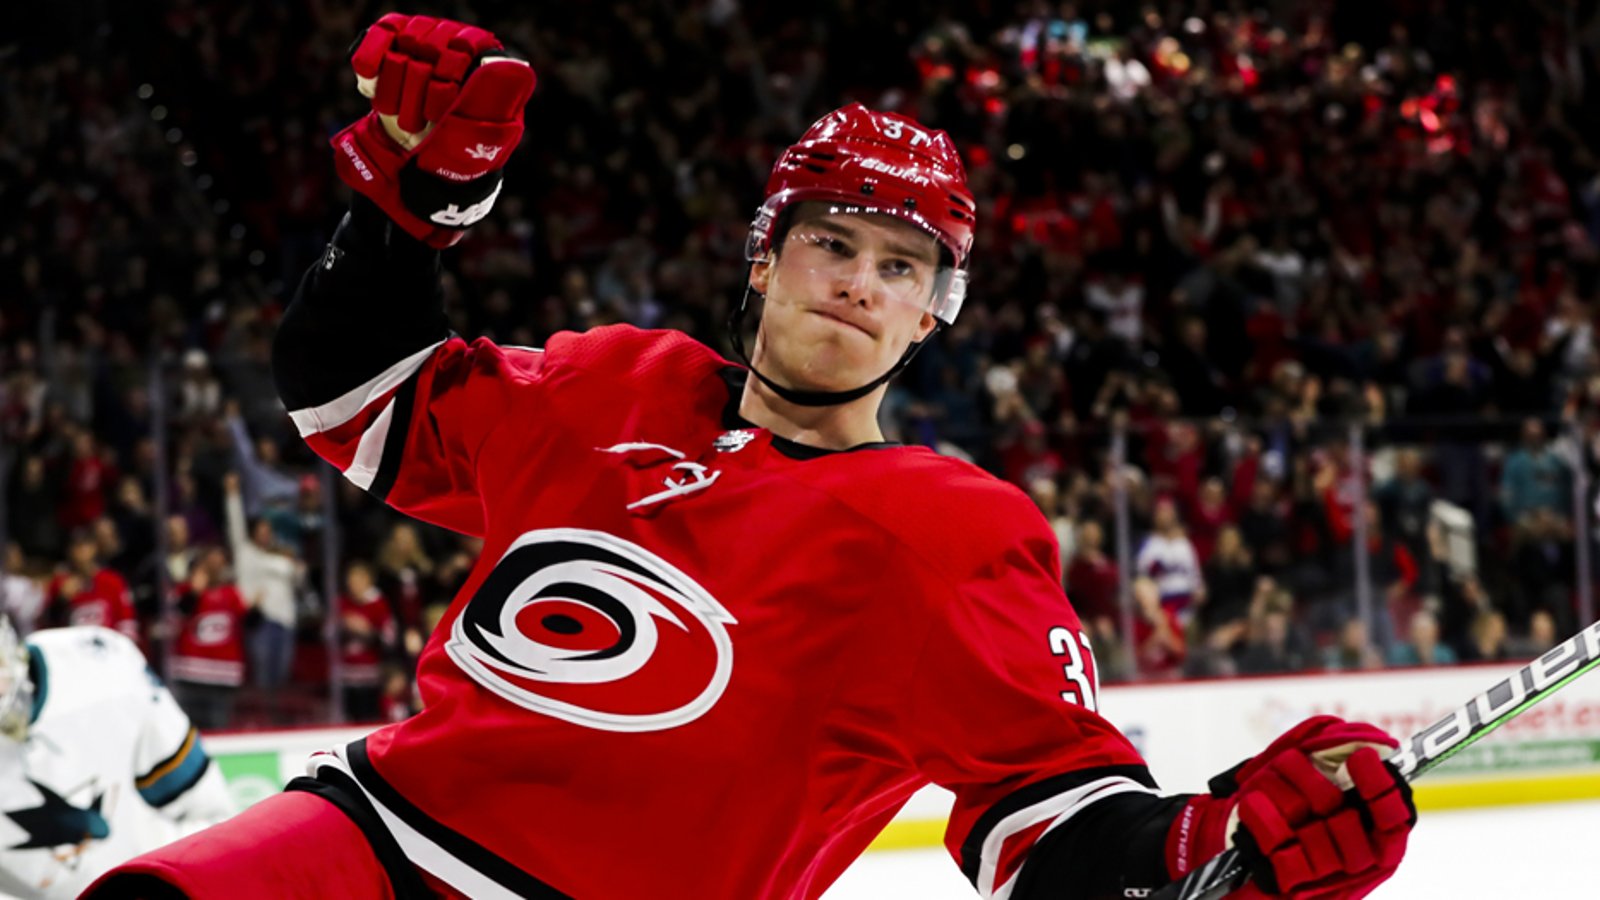 Svechnikov signs a monster eight year contract with the Hurricanes